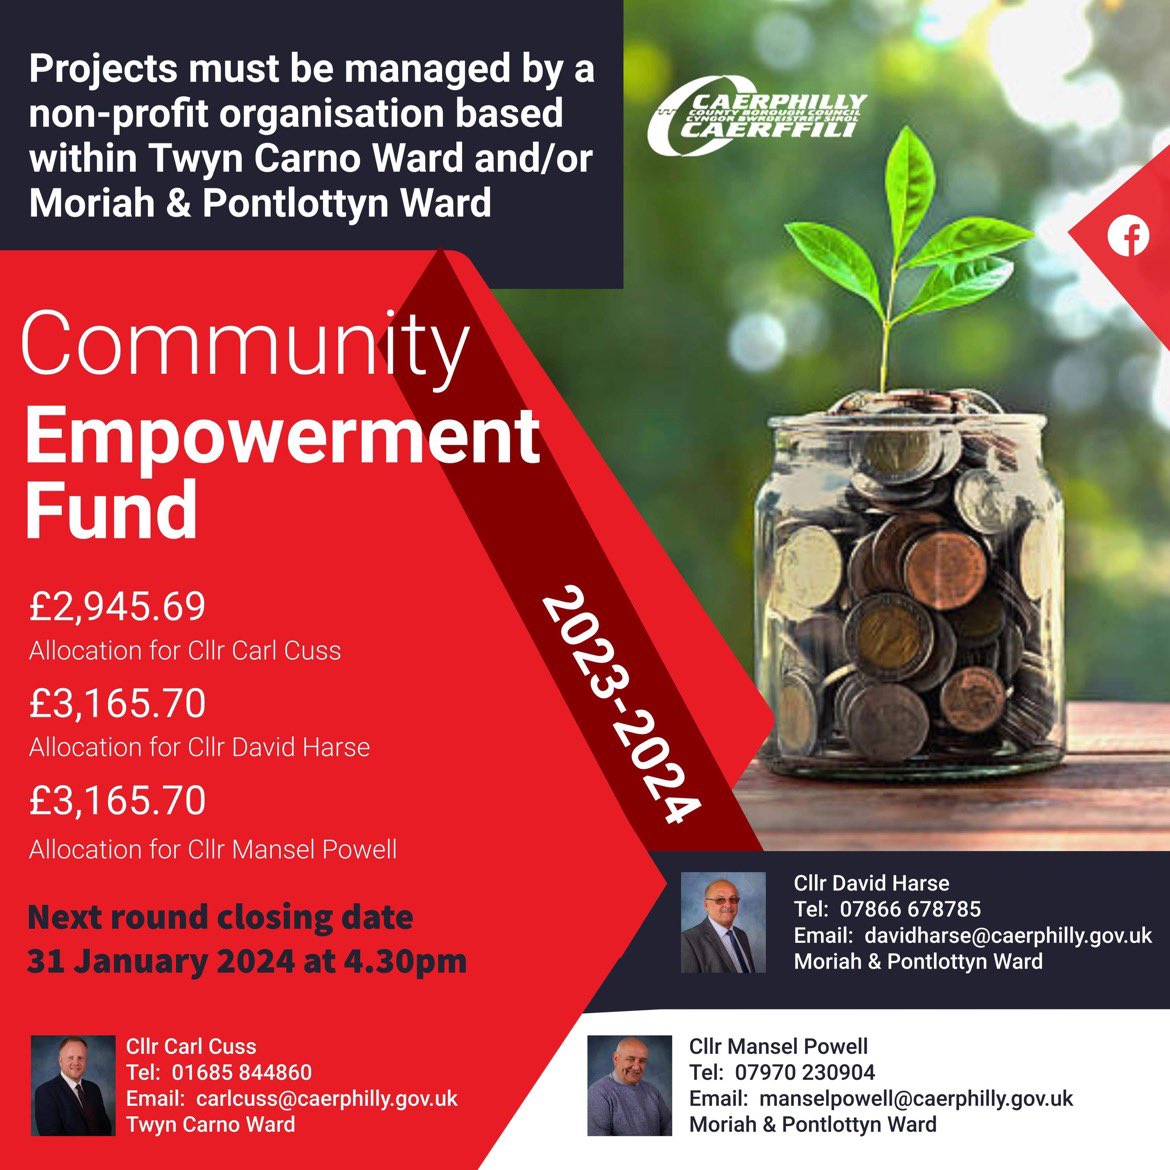 📣 Closing date for the next round of Community Empowerment Fund Grants is 31st January 2024. To access the Application Criteria, please visit: caerphilly.gov.uk/services/benef… #CEF #TeamCaerphilly #CCBC #Councillors #CaerphillyBorough #Community #Rhymney #Moriah #Pontlottyn